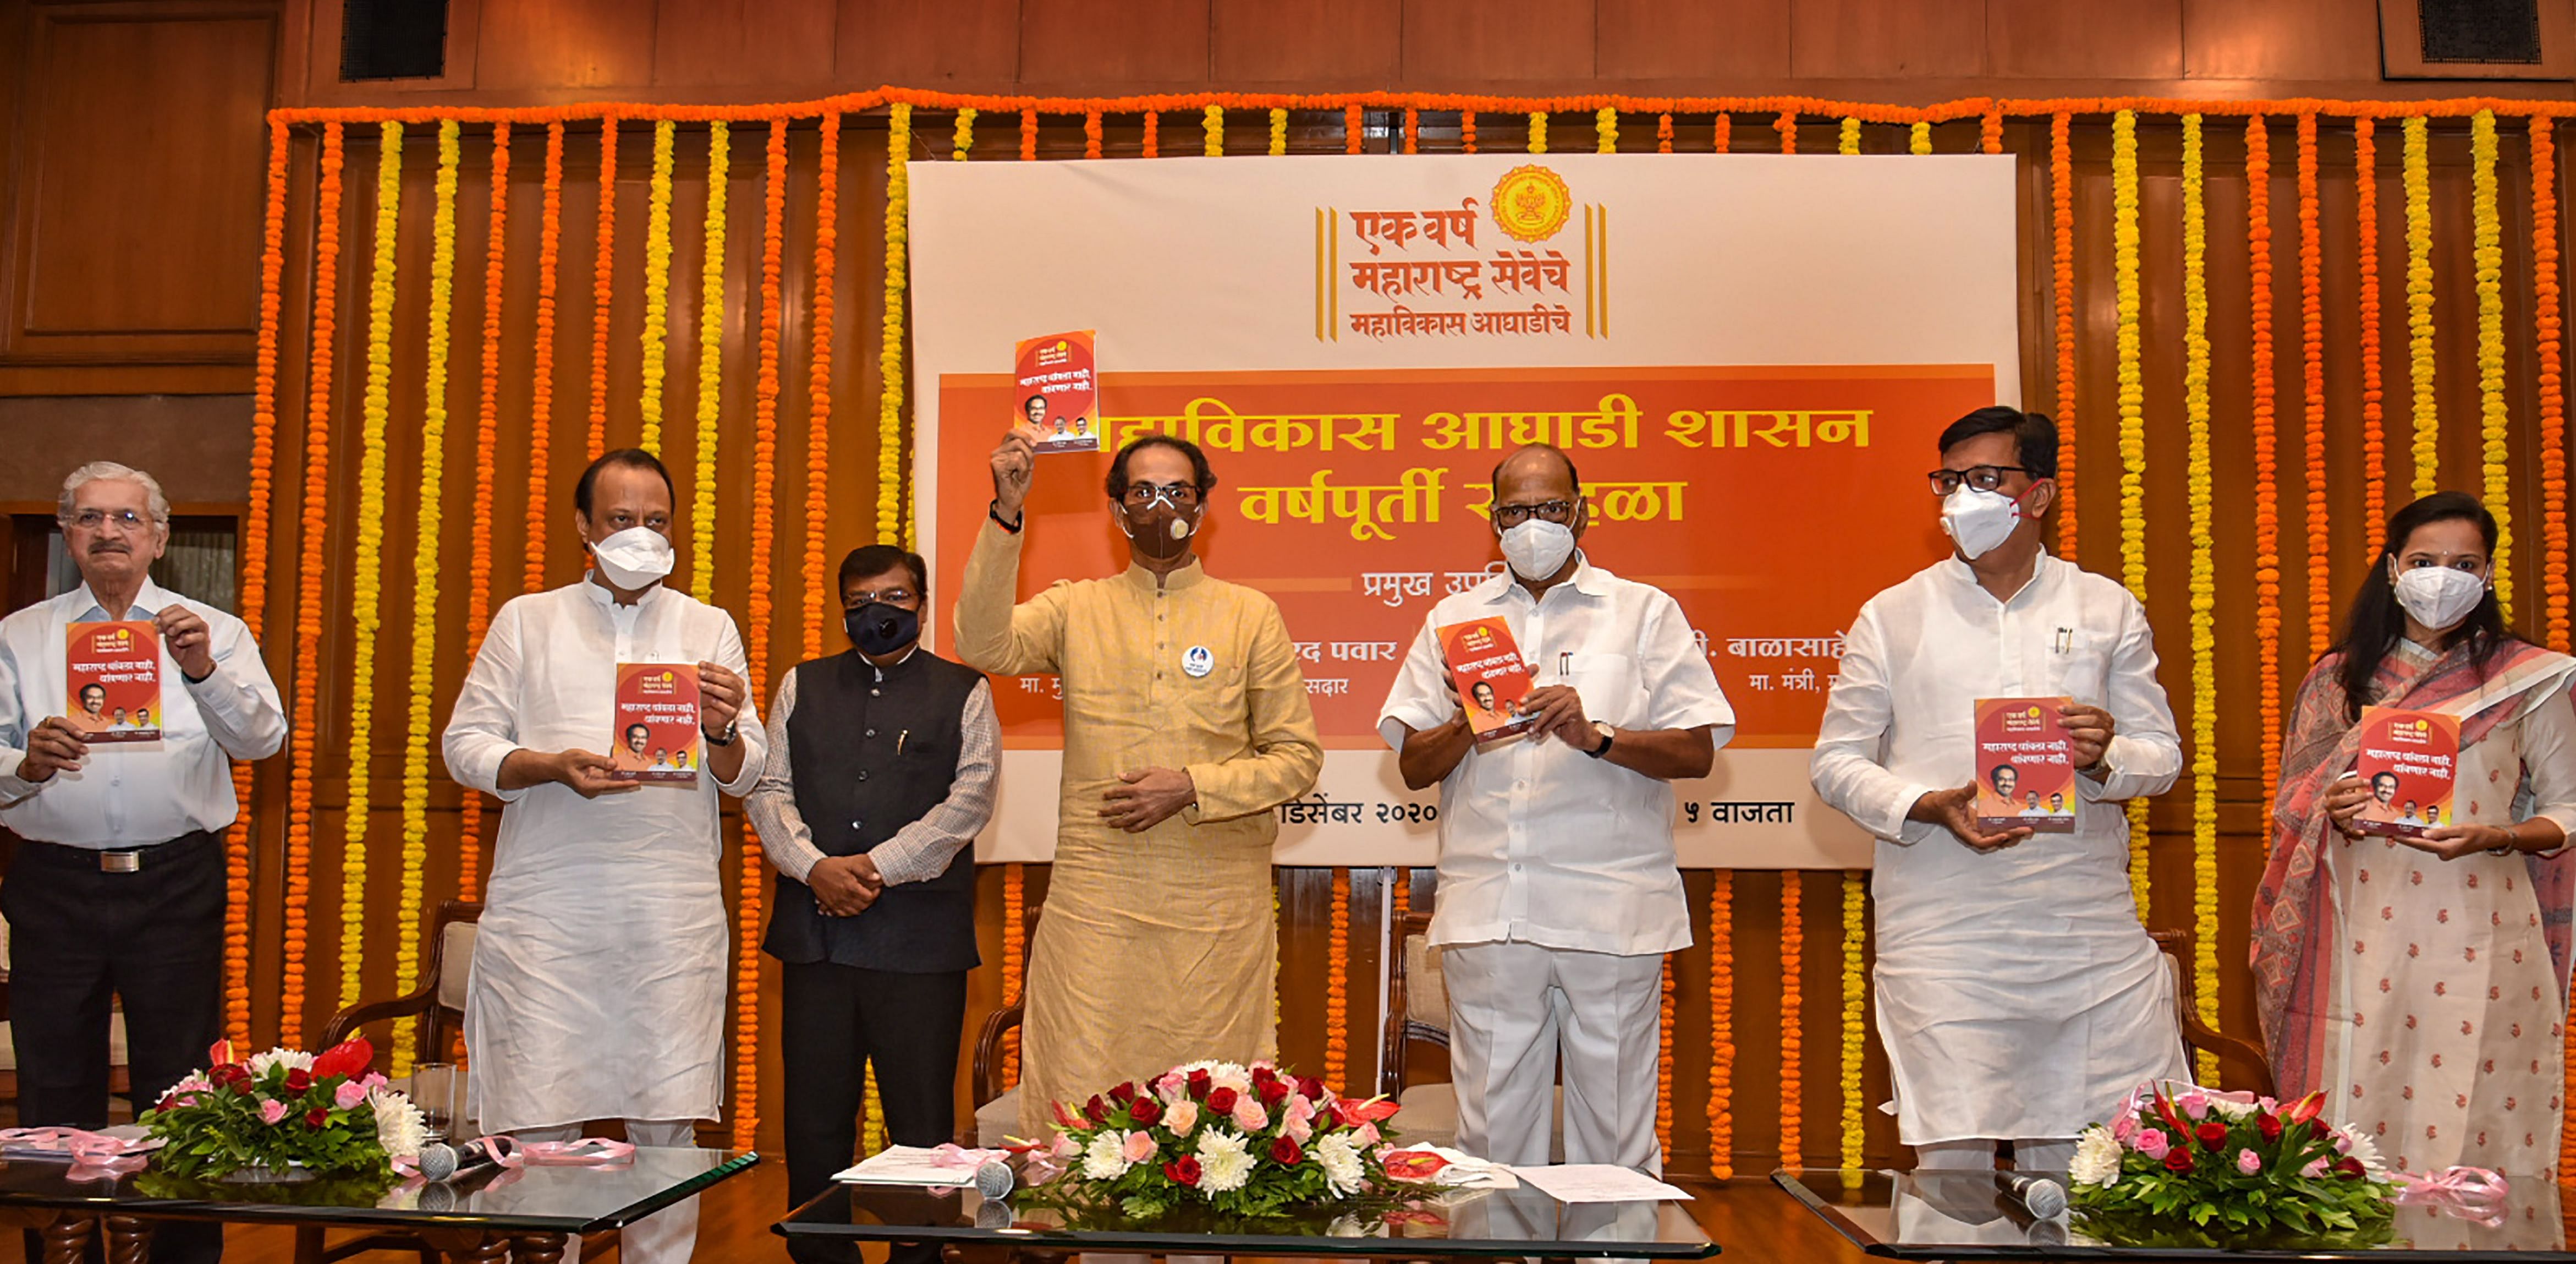 Maharashtra Chief Minister Uddhav Thackeray along with Deputy CM Ajit Pawar (2L), NCP Chief Sharad Pawar (3R) and others during a book launch on the completion of one year of their alliance-led government in the state, in Mumbai. Credit: PTI